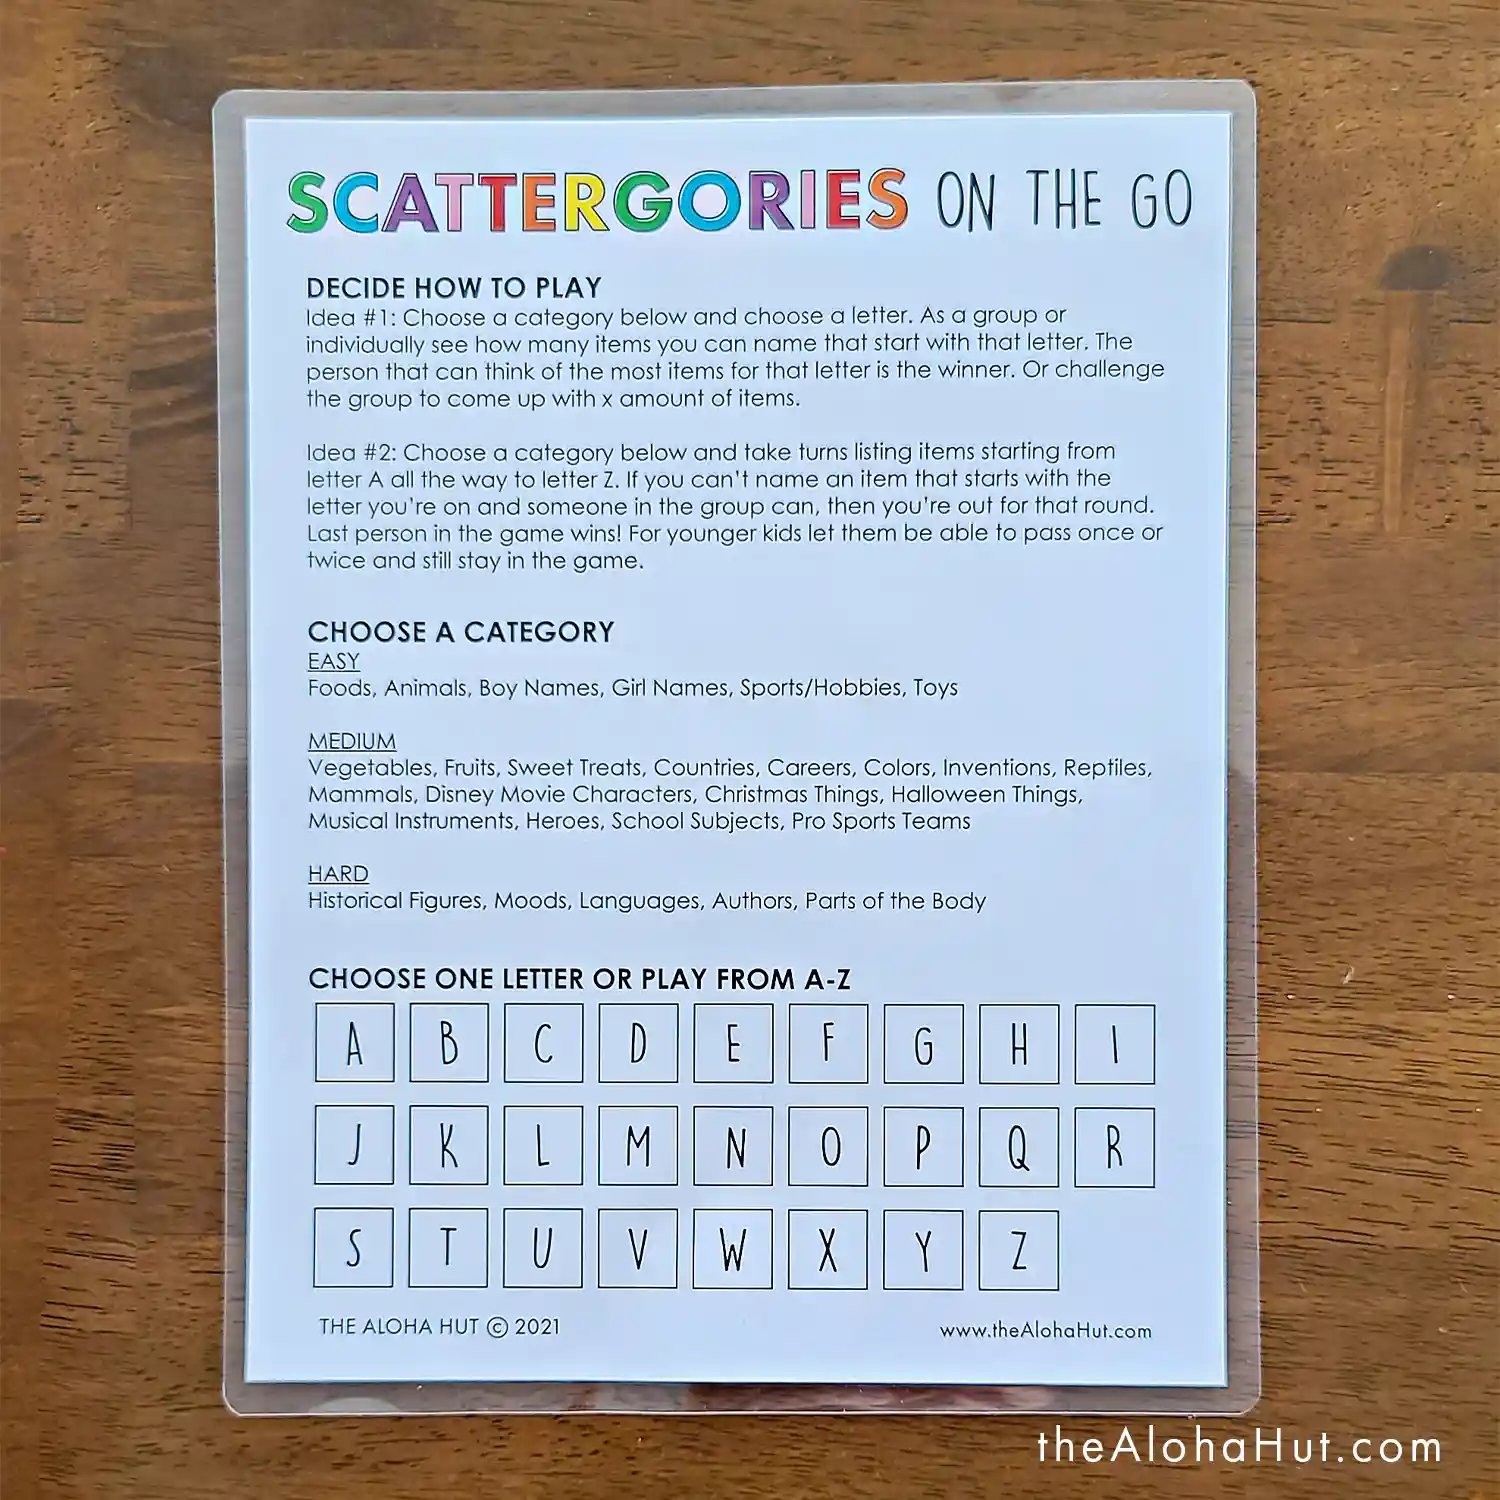 DIY Portable Road Trip Kits - 10 Free Printable Activity Pages - Travel Games - Scattegories on the Go